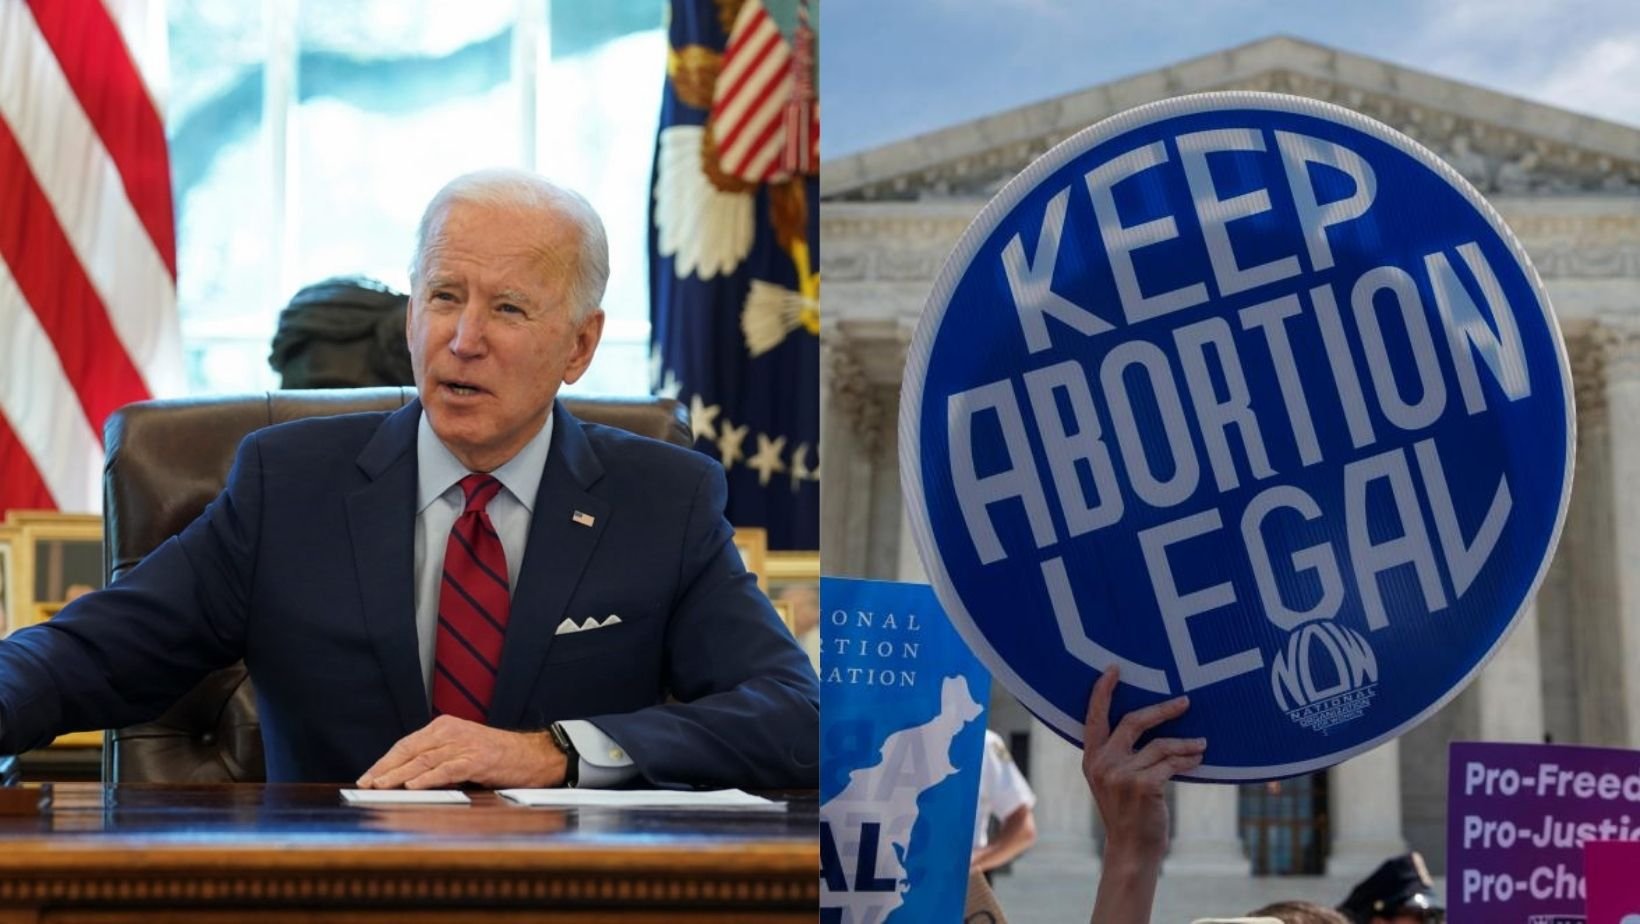 1 151.jpg?resize=1200,630 - New Biden Policy Allows Women To Legally Get An Abortion Pill In The Mail